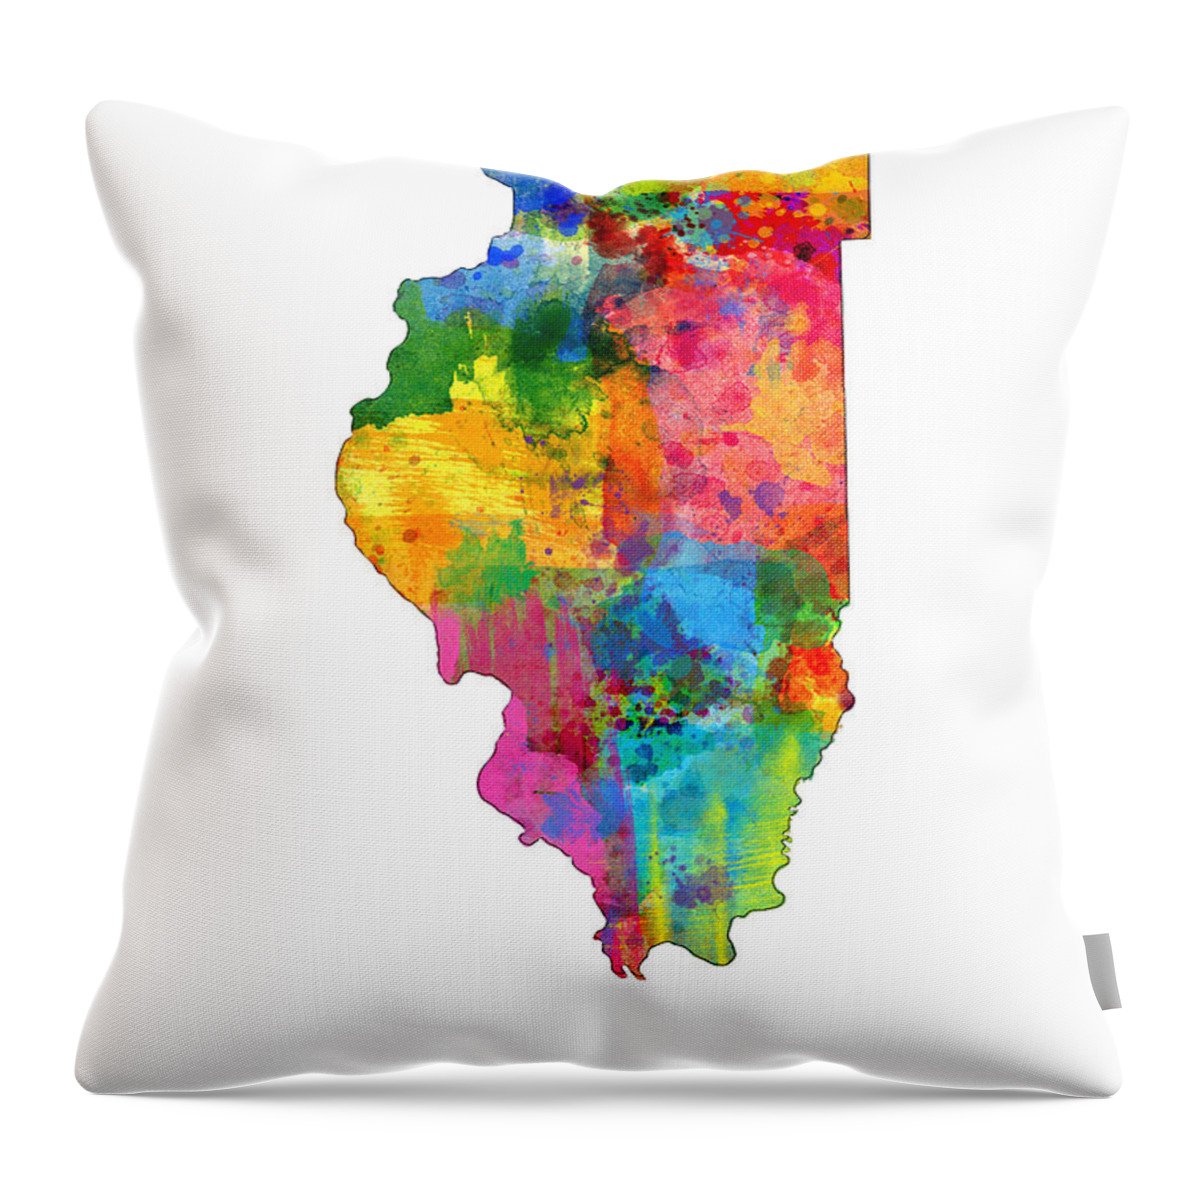 United States Map Throw Pillow featuring the digital art Illinois Map by Michael Tompsett